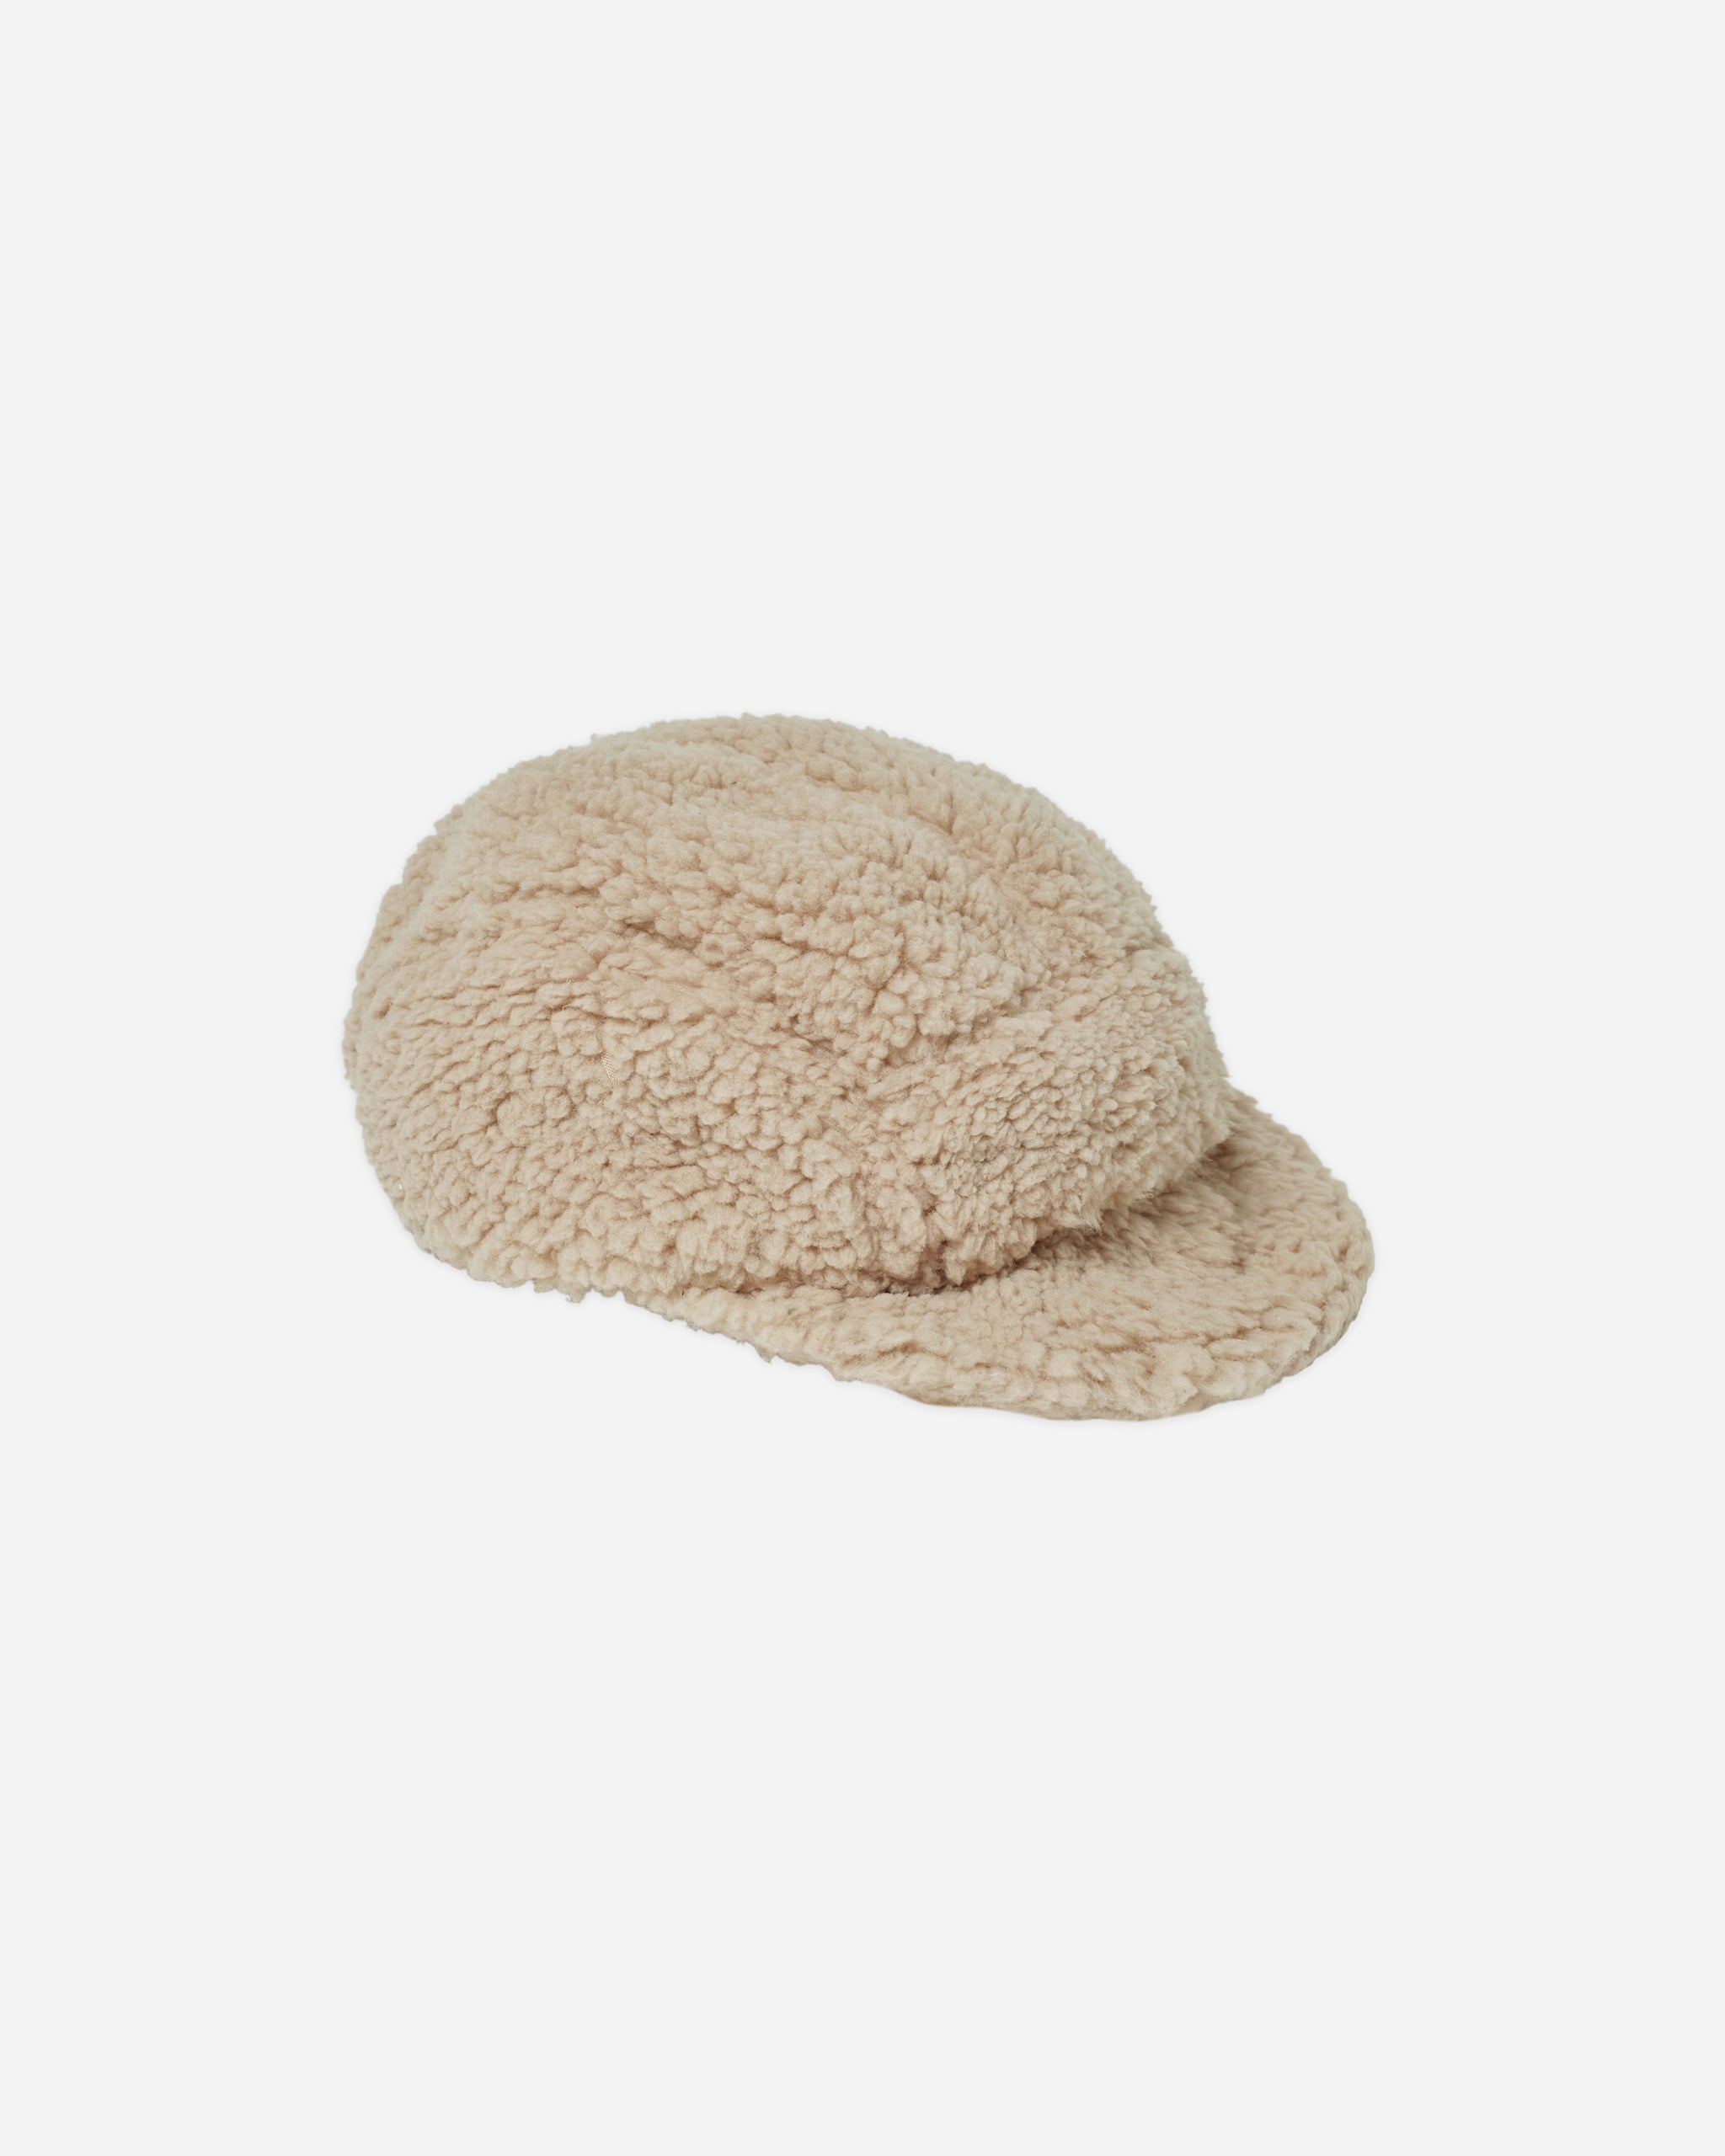 Sherpa Baby Cap || Sand - Rylee + Cru | Kids Clothes | Trendy Baby Clothes | Modern Infant Outfits |